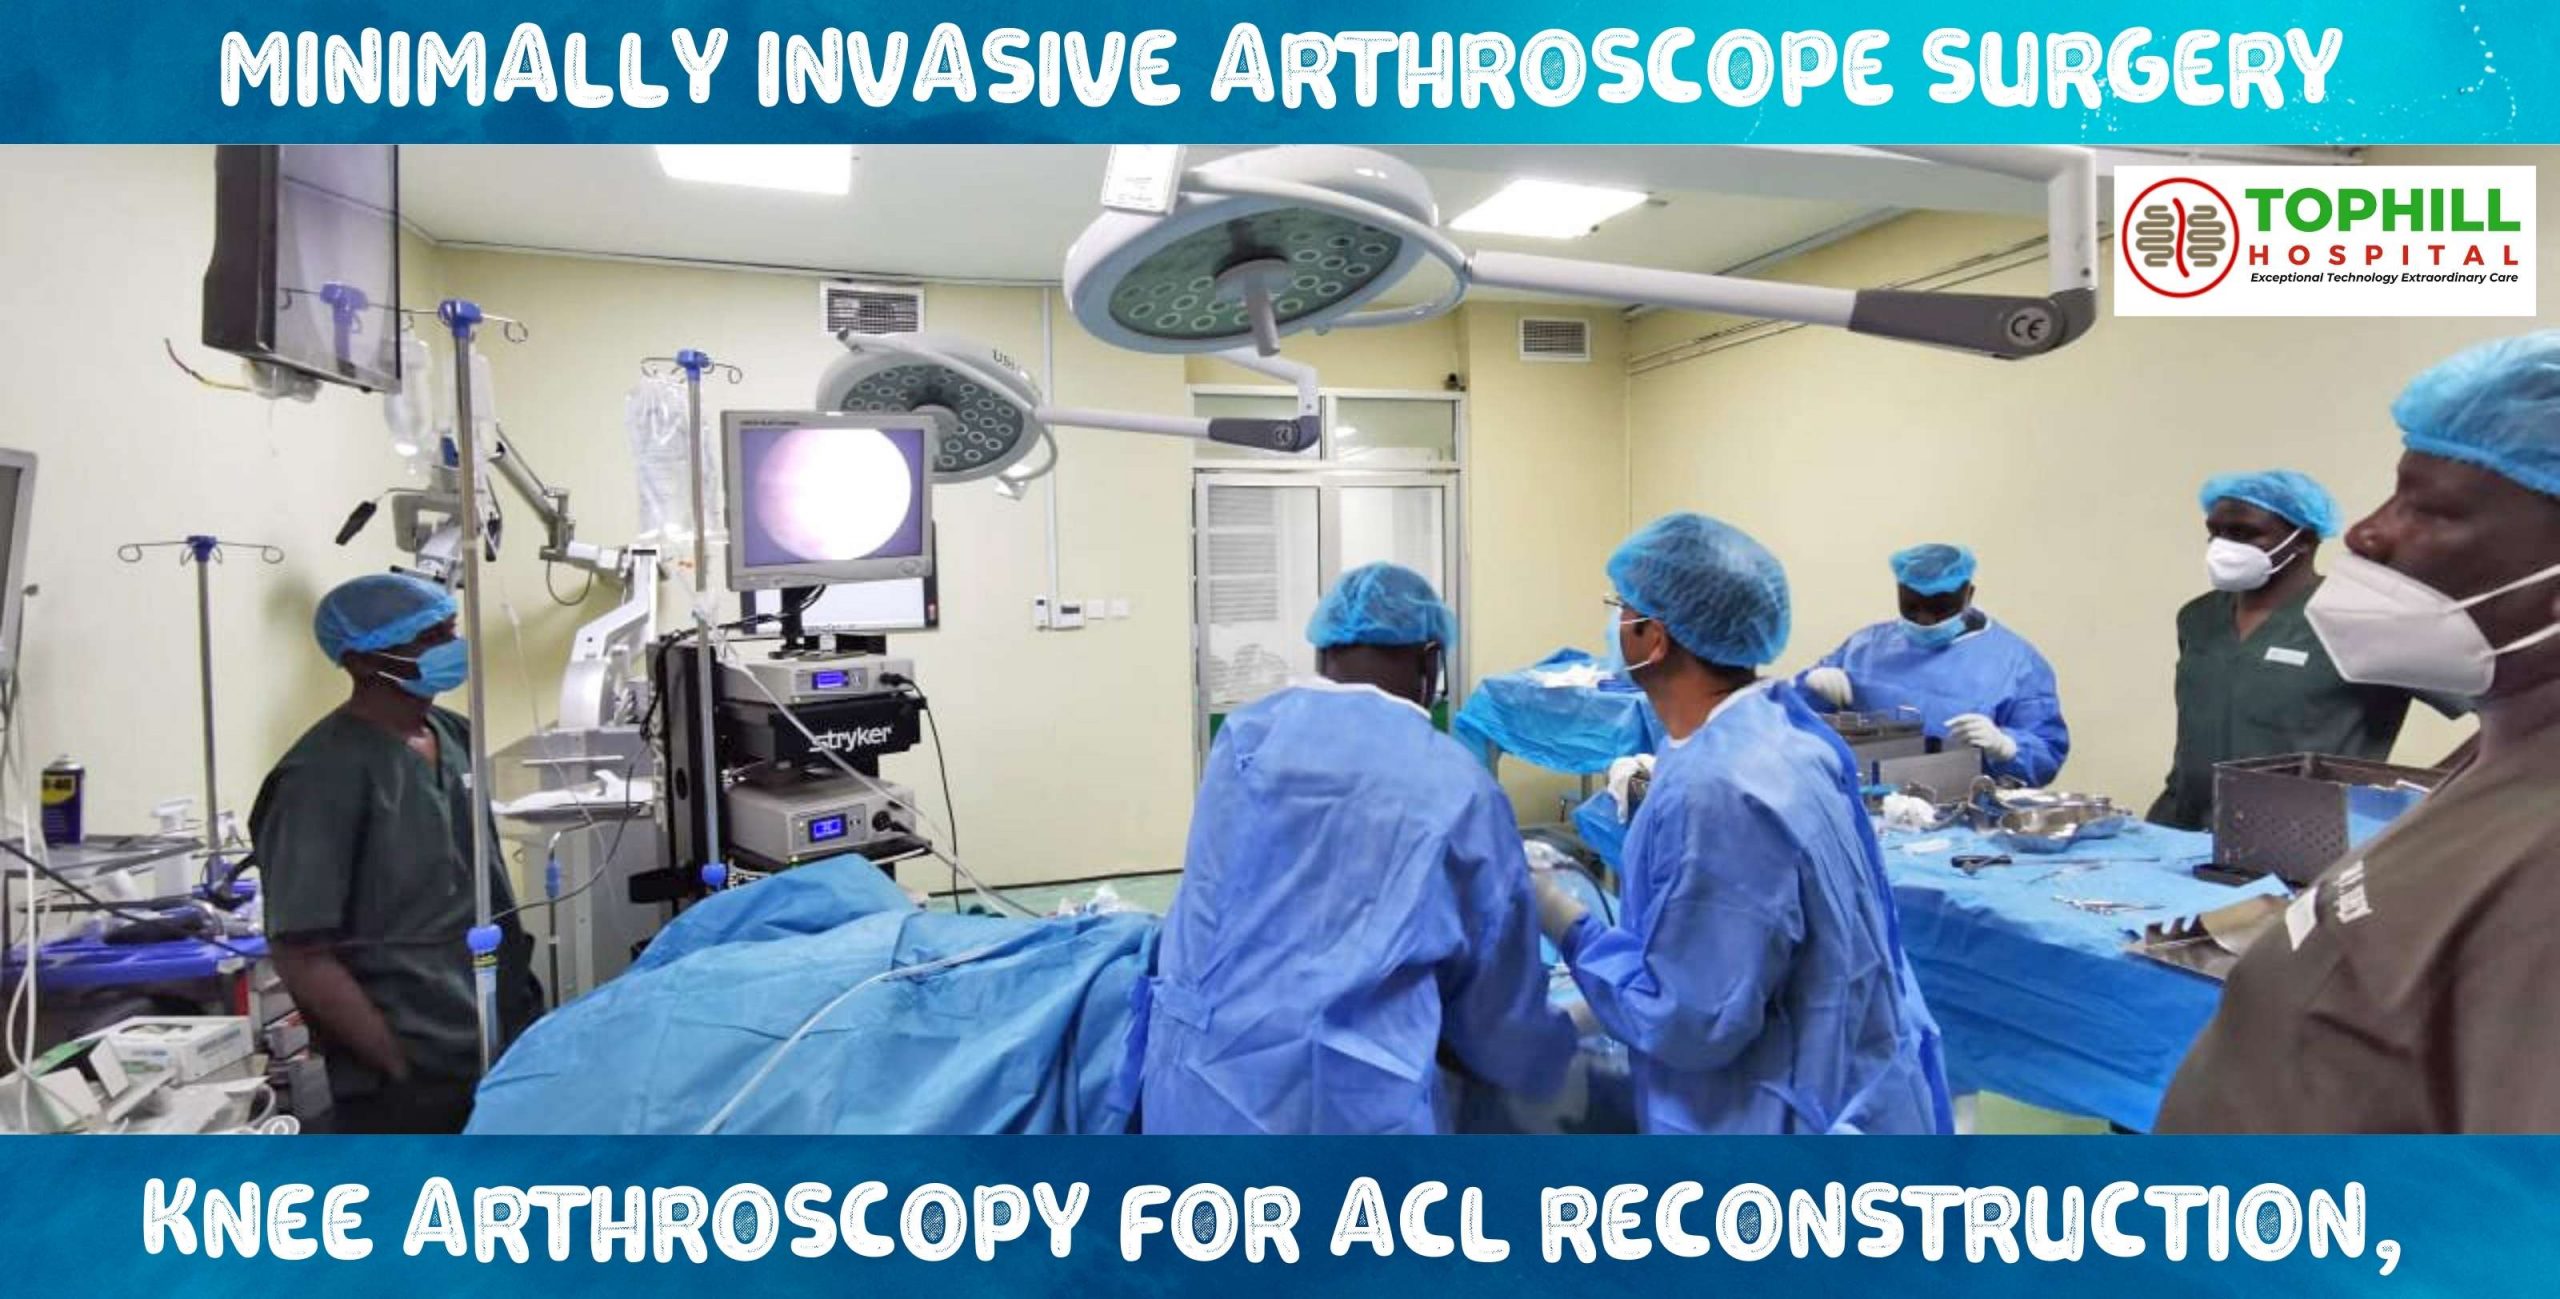 Tophill Hospital conducts Minimally Invasive Arthroscope Surgery for the ACL, Meniscus: Knee Arthroscopy for ACL Reconstruction, Meniscal Repair, and Other Knee Problems.